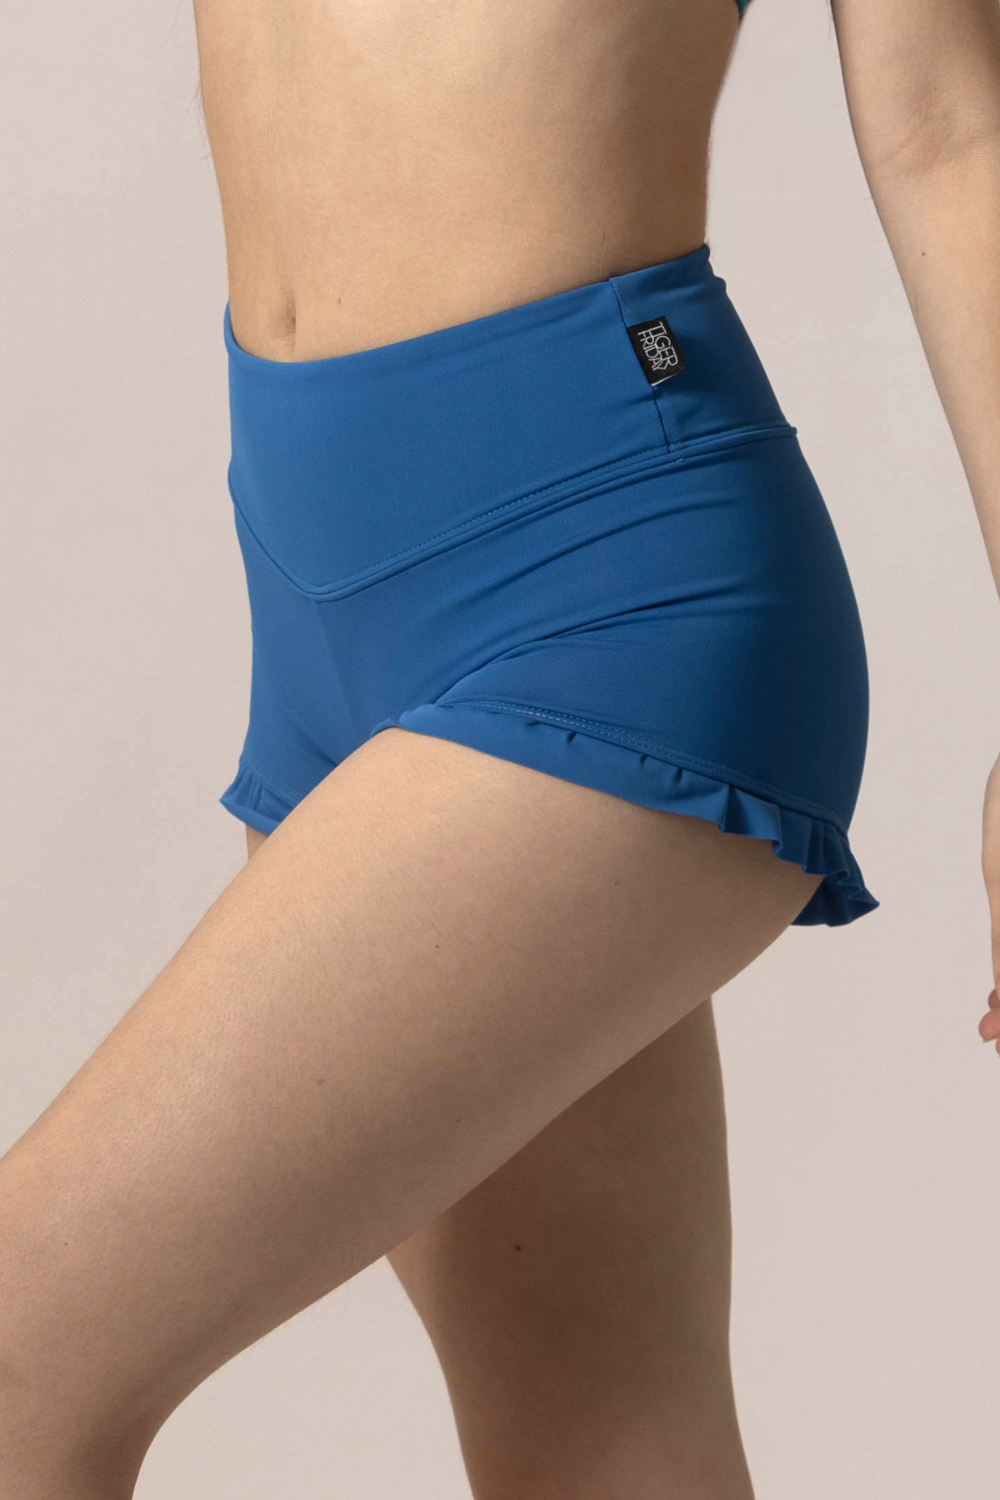 Tiger Friday Online Shop for Filly Bootie Shorts - Blue Jay Dancewear - View : 3